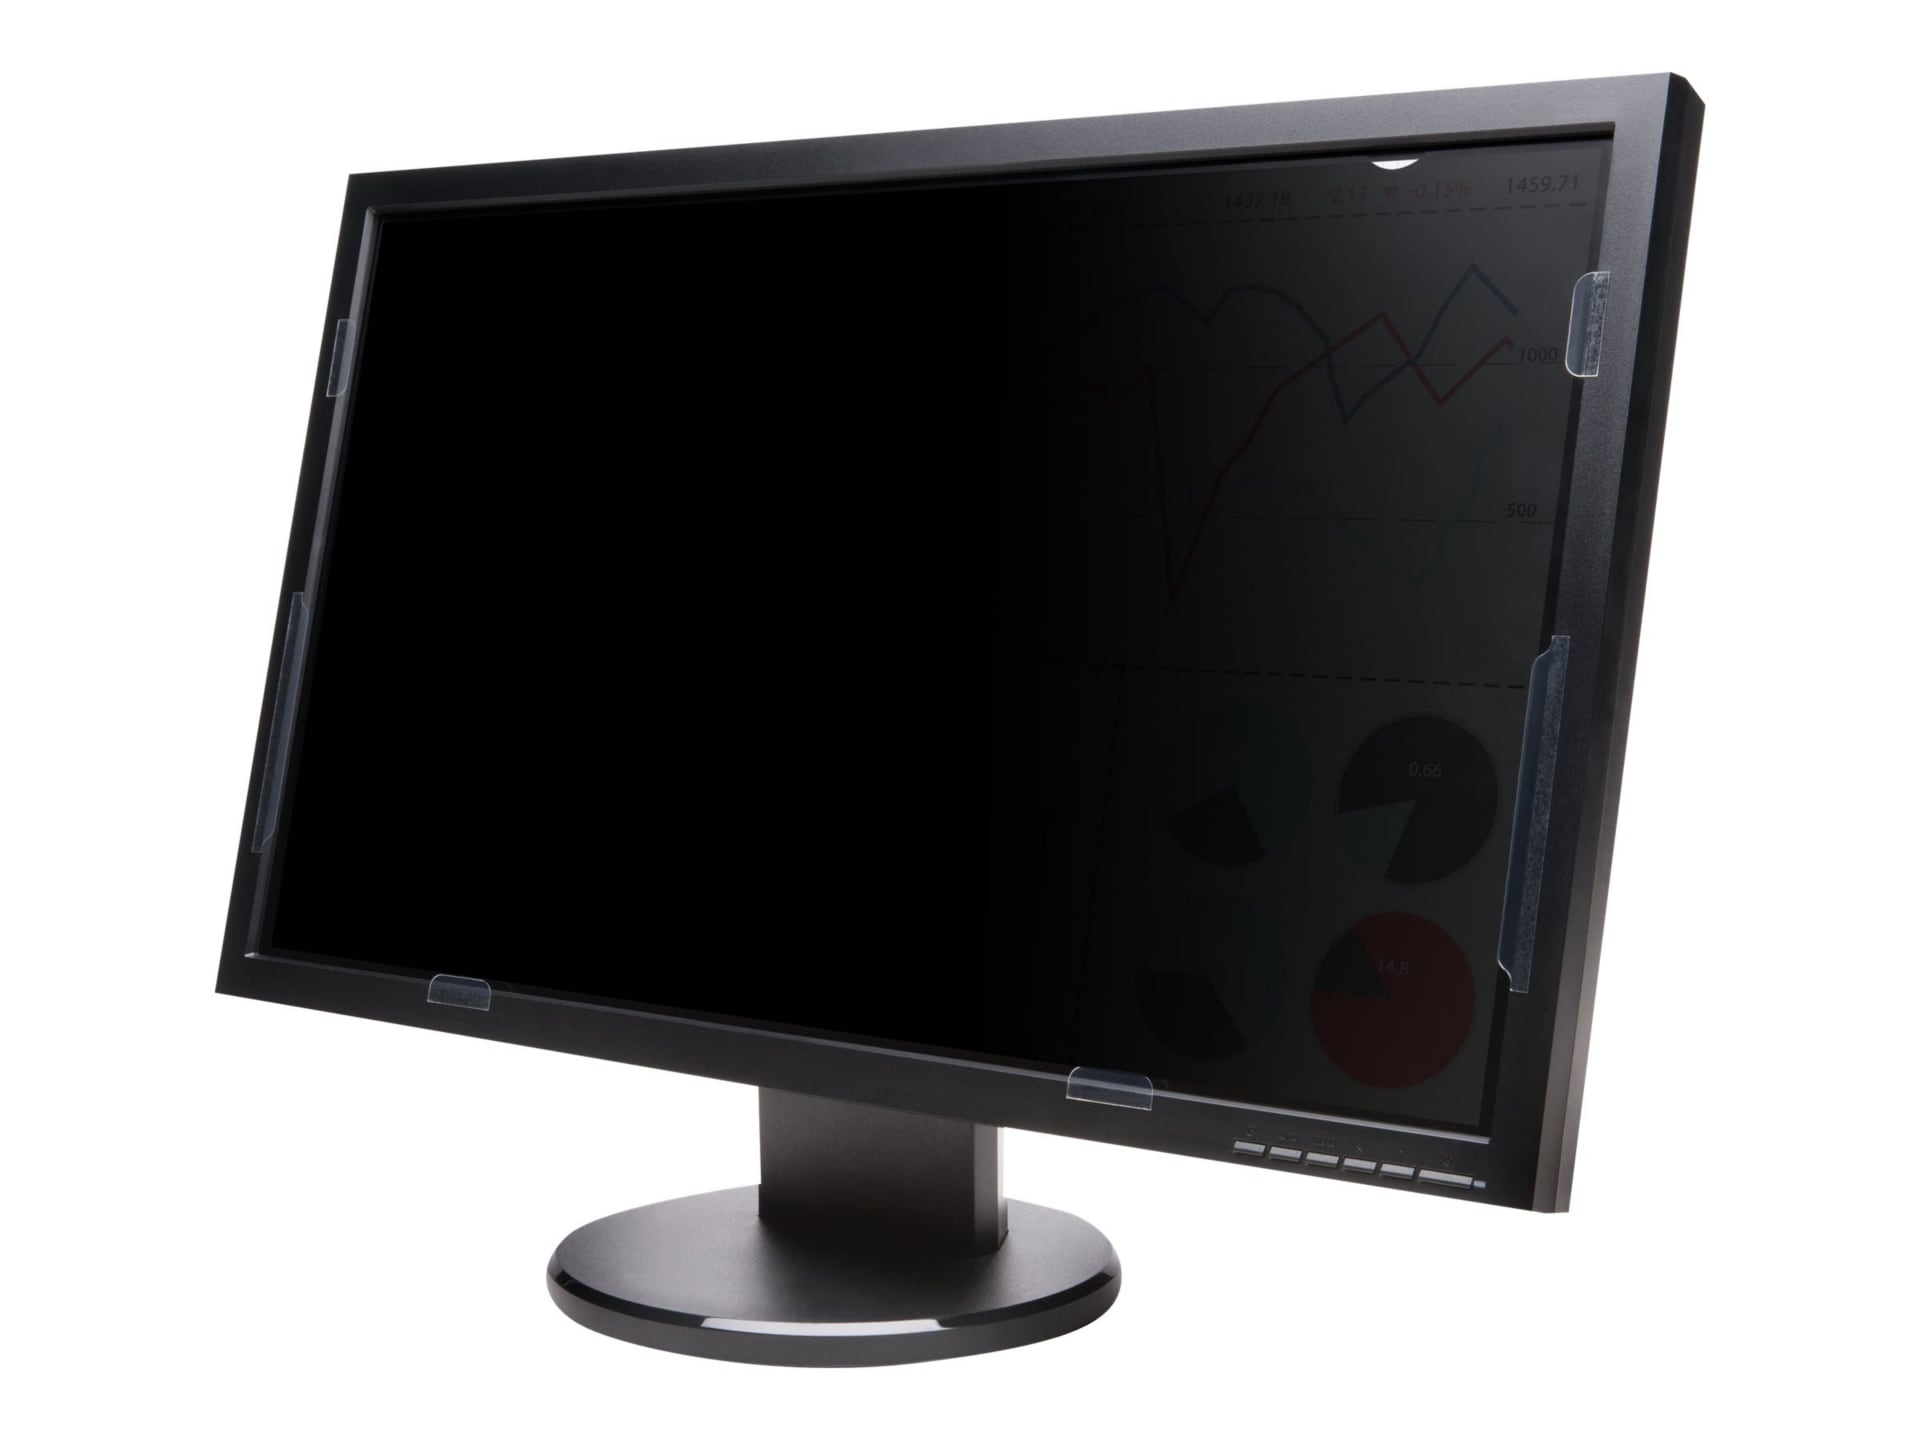 Kensington FP240W9 Privacy Screen for 24" Widescreen Monitors - 16:9 - display privacy filter - 24" wide